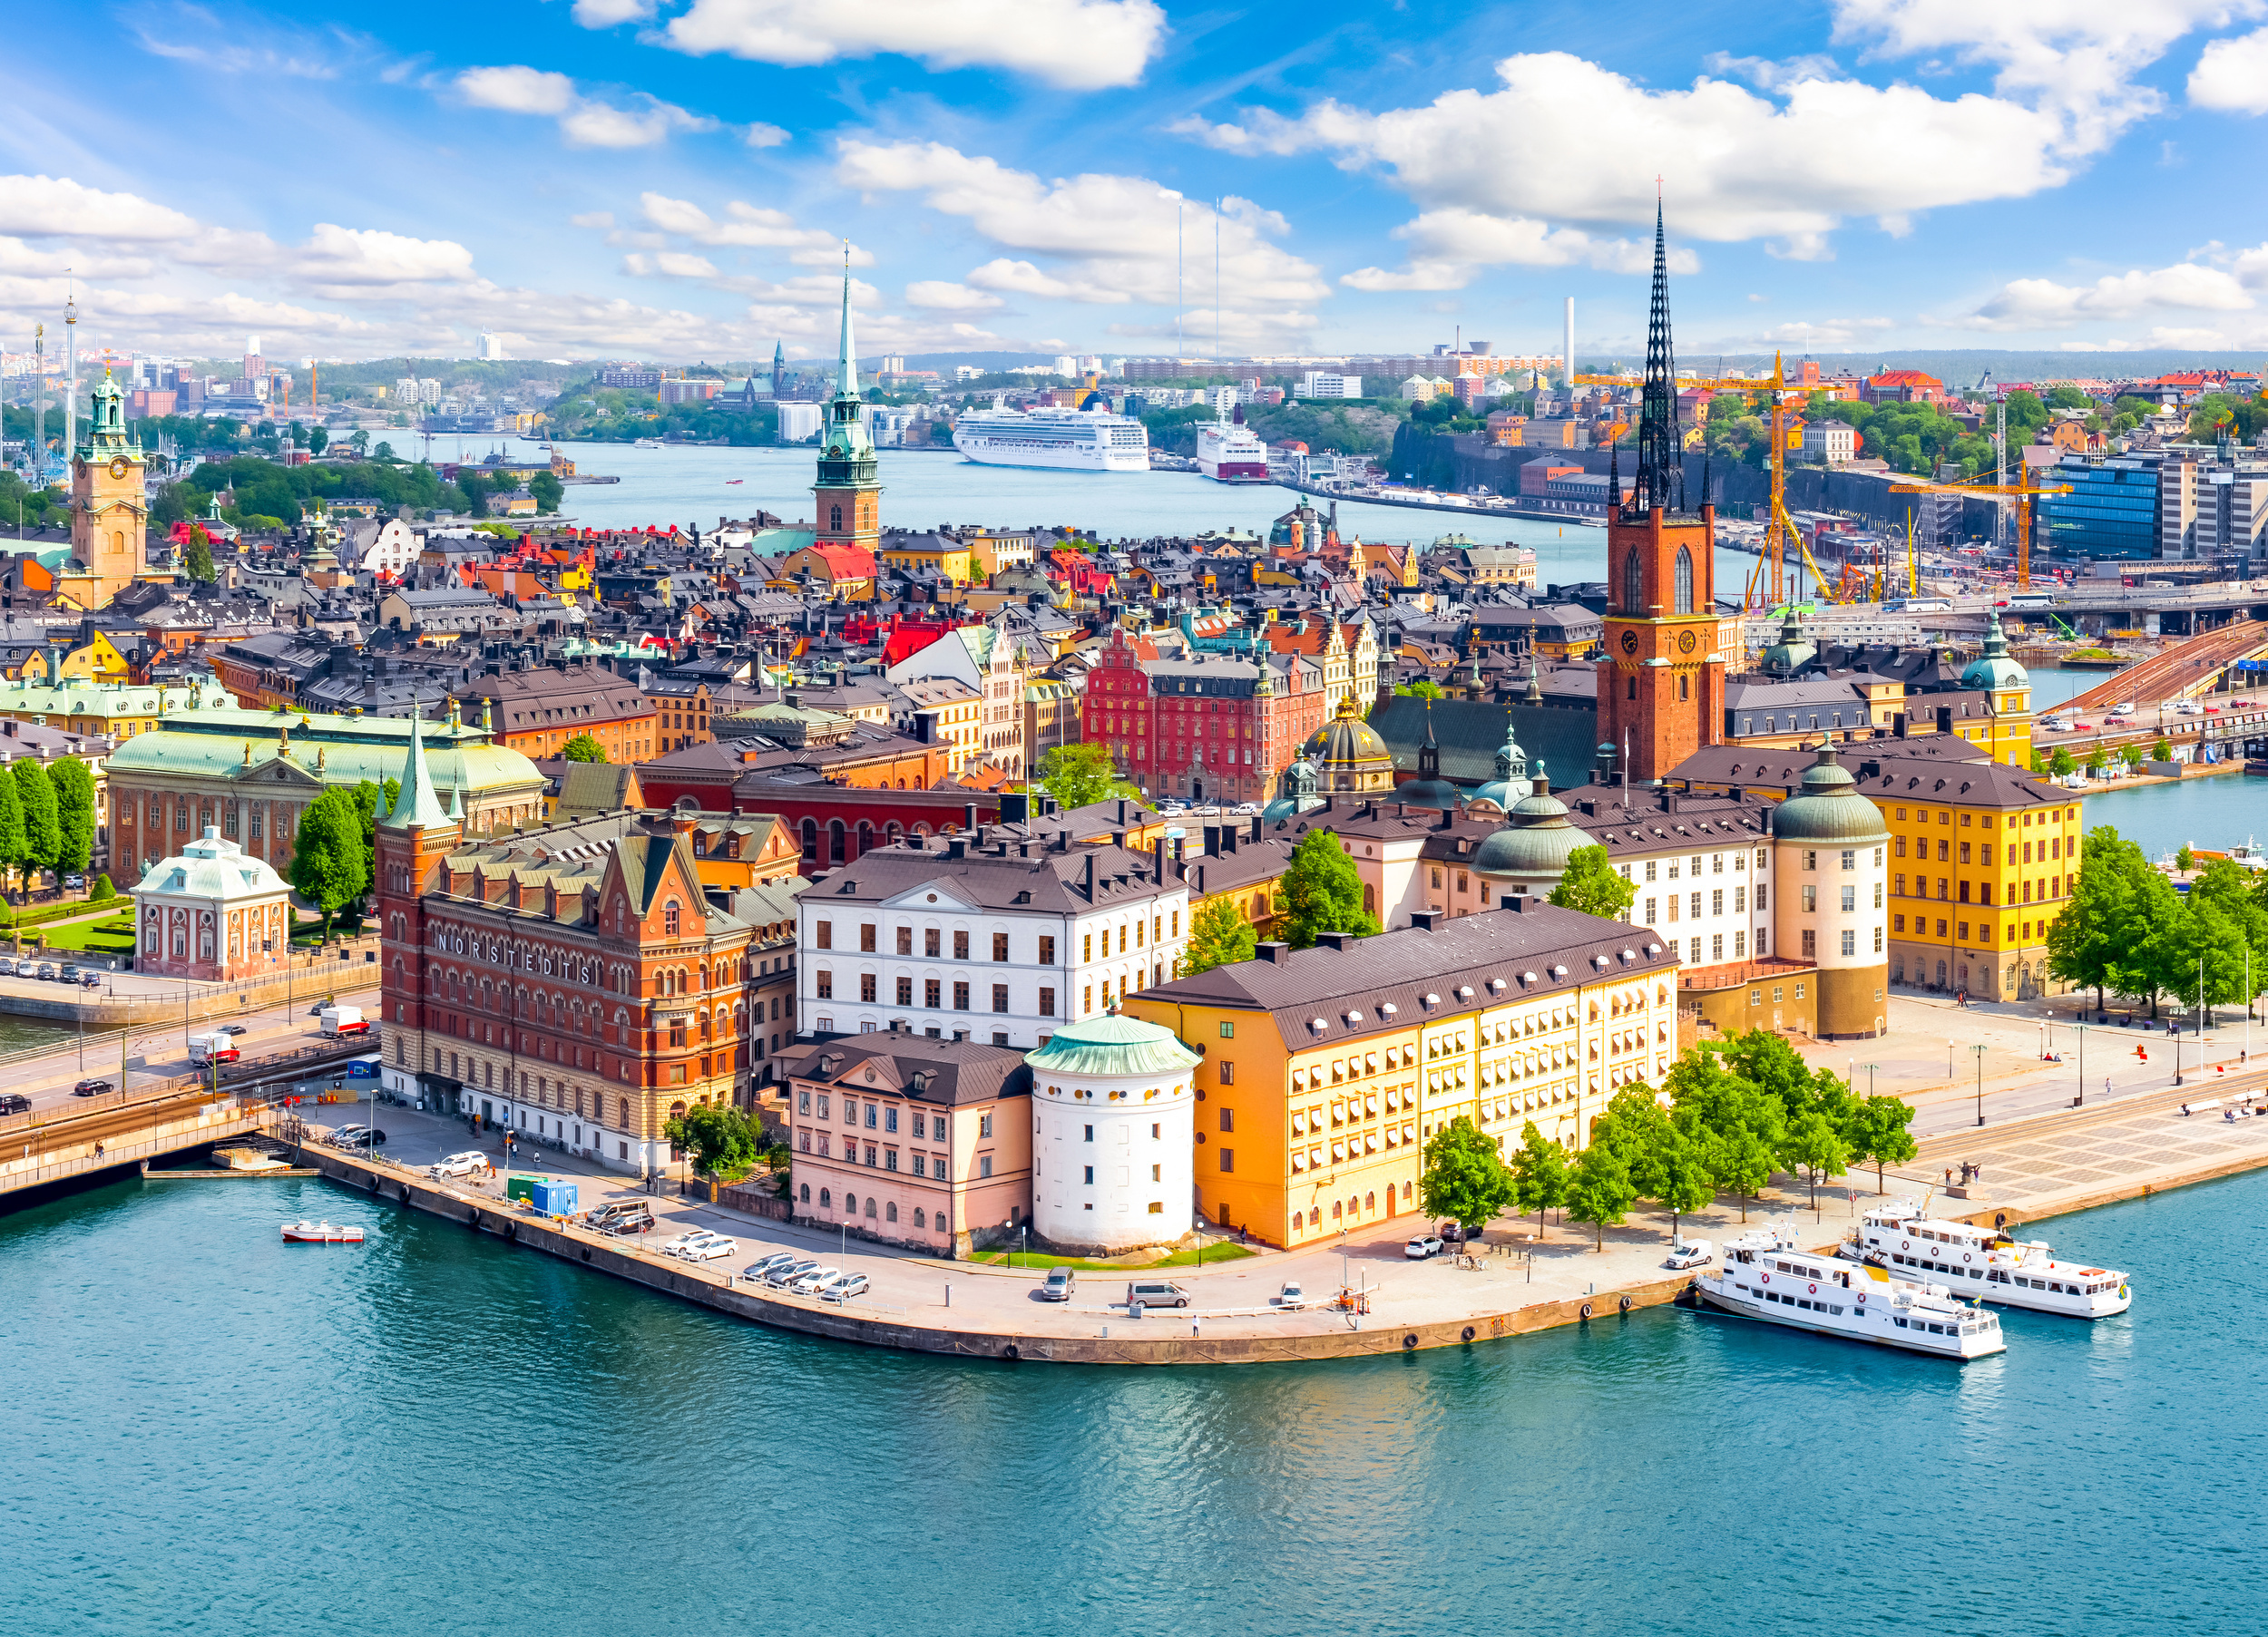 <p>Unless you really like frigid walks and bundling up, it’s most advisable to visit Stockholm in the summer months. Then, you can make the most out of rambling around the Scandinavian city in the sun and enjoying fika (Swedish coffee break) afterward.</p><p>You may also like: <a href='https://www.yardbarker.com/lifestyle/articles/13_foods_you_have_to_eat_in_france/s1__38159249'>13 foods you have to eat in France</a></p>